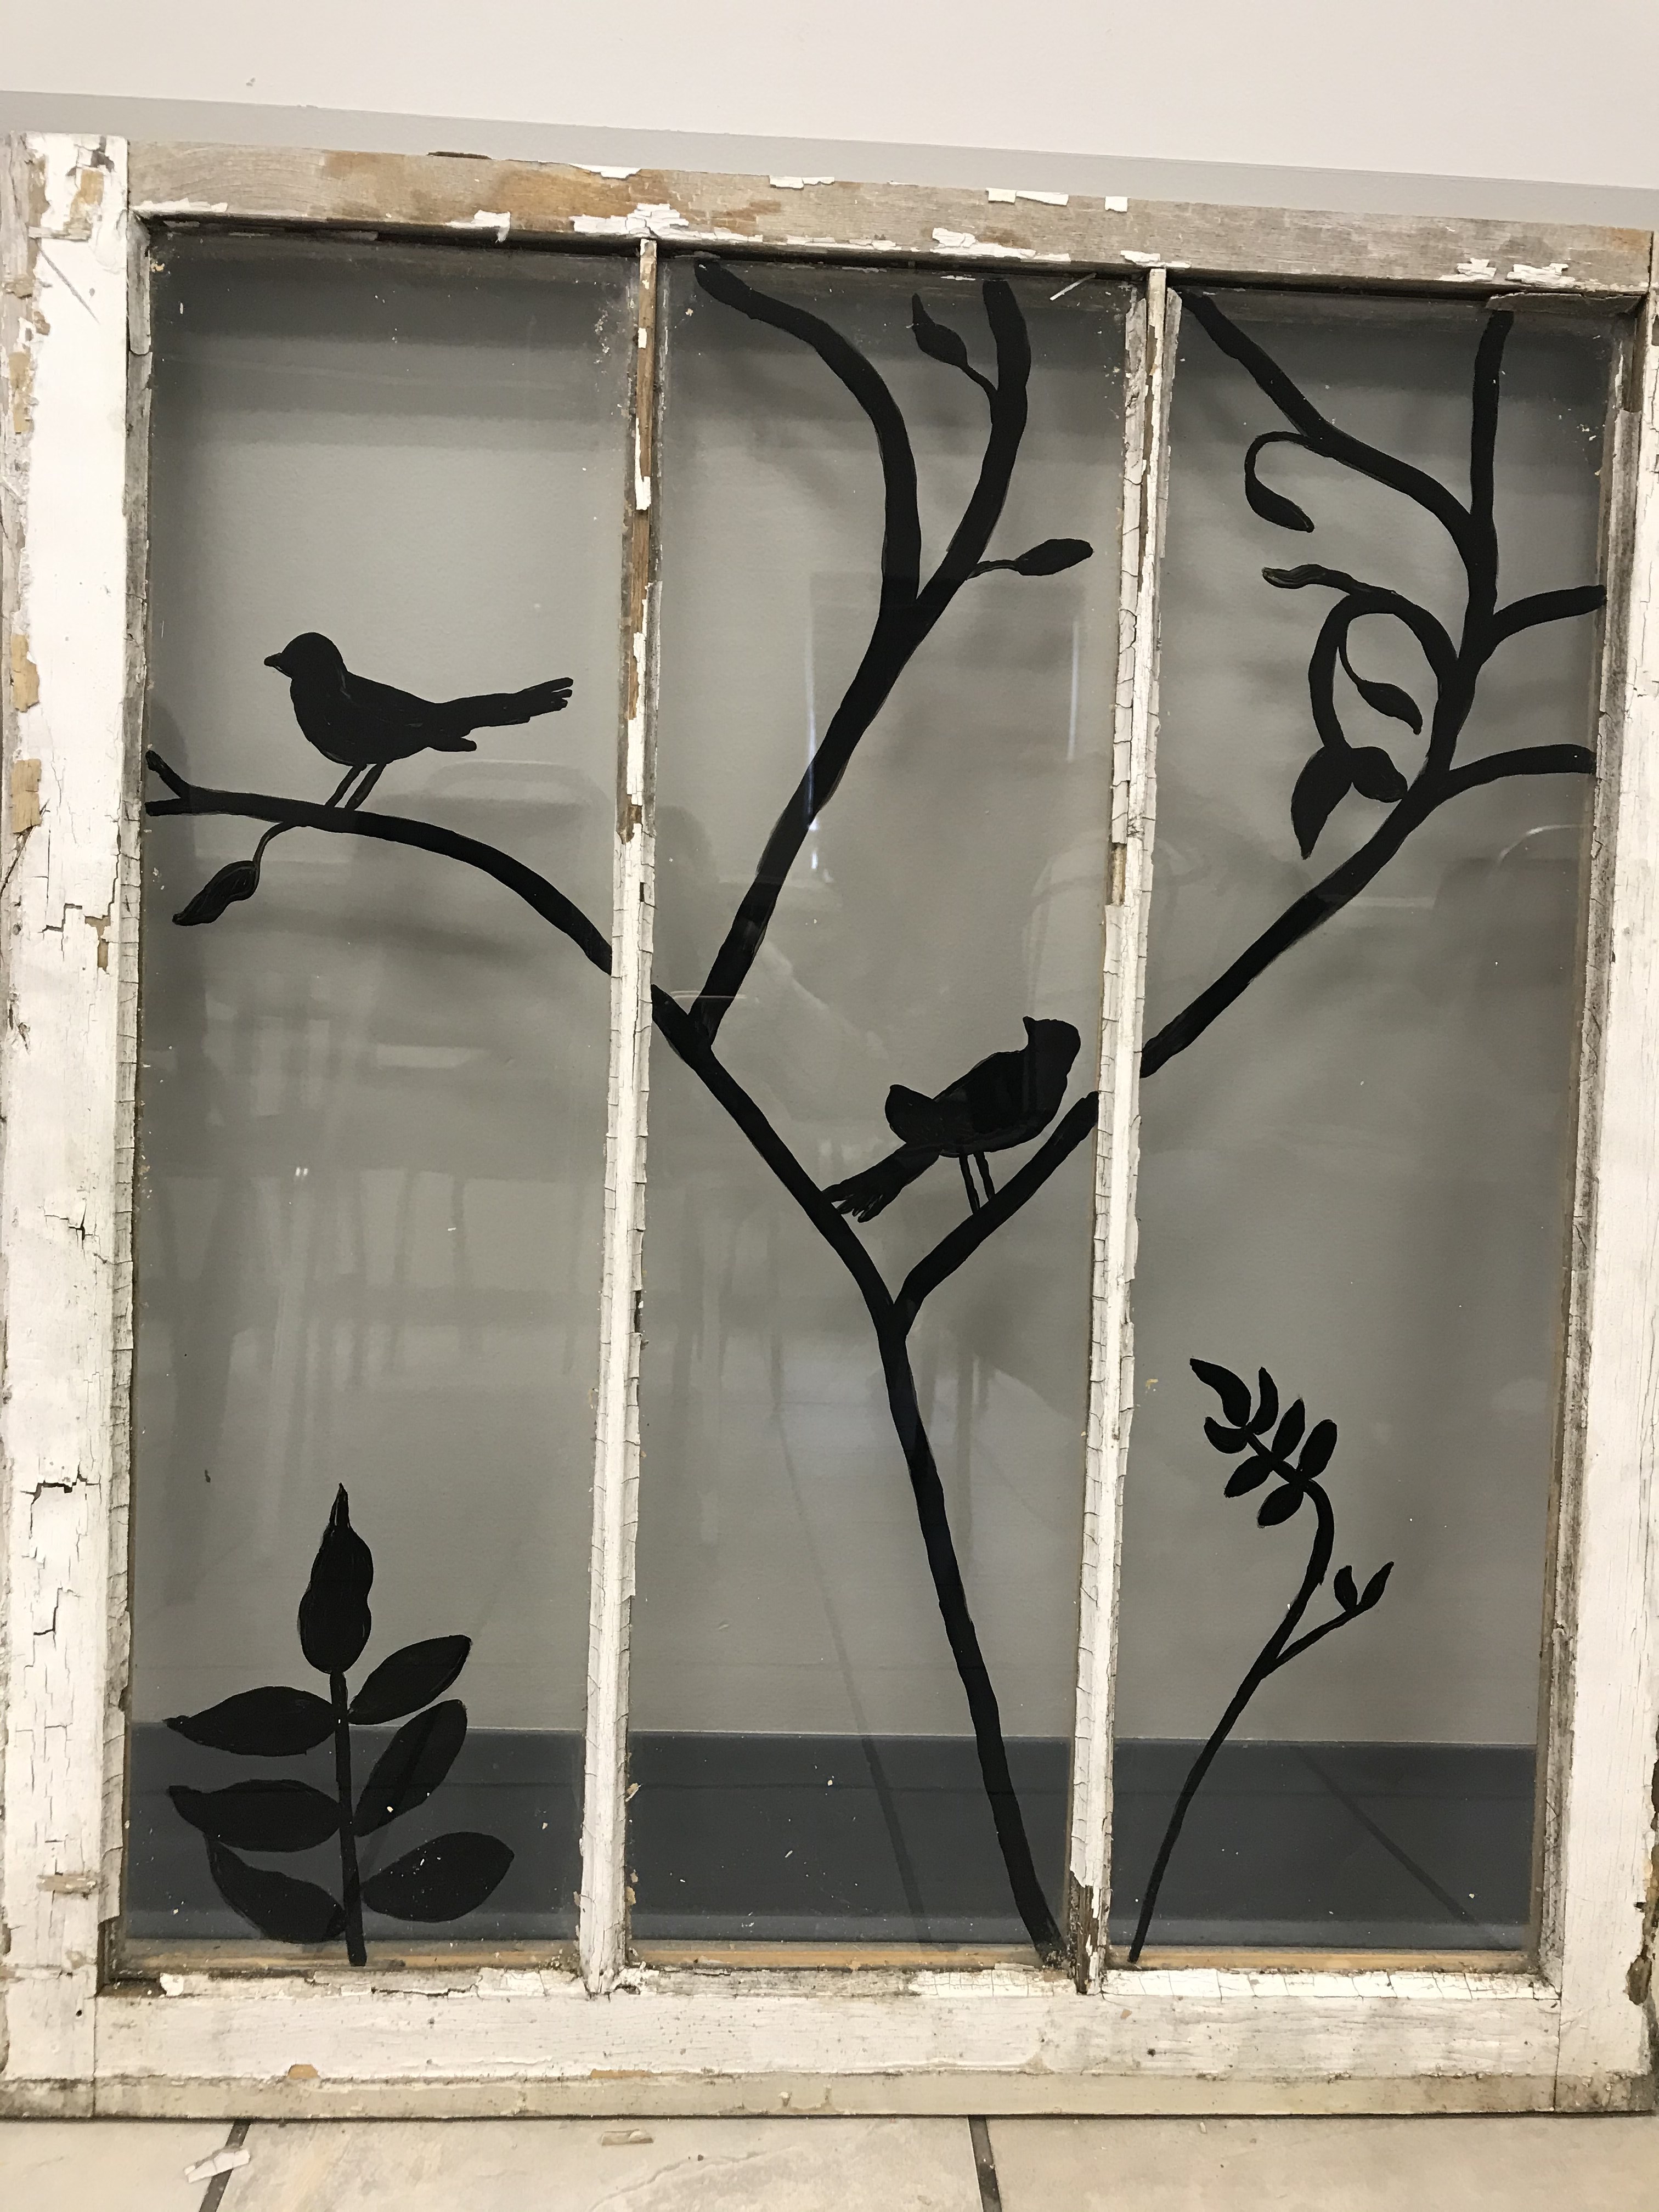 Silhouette of birds painted on a window